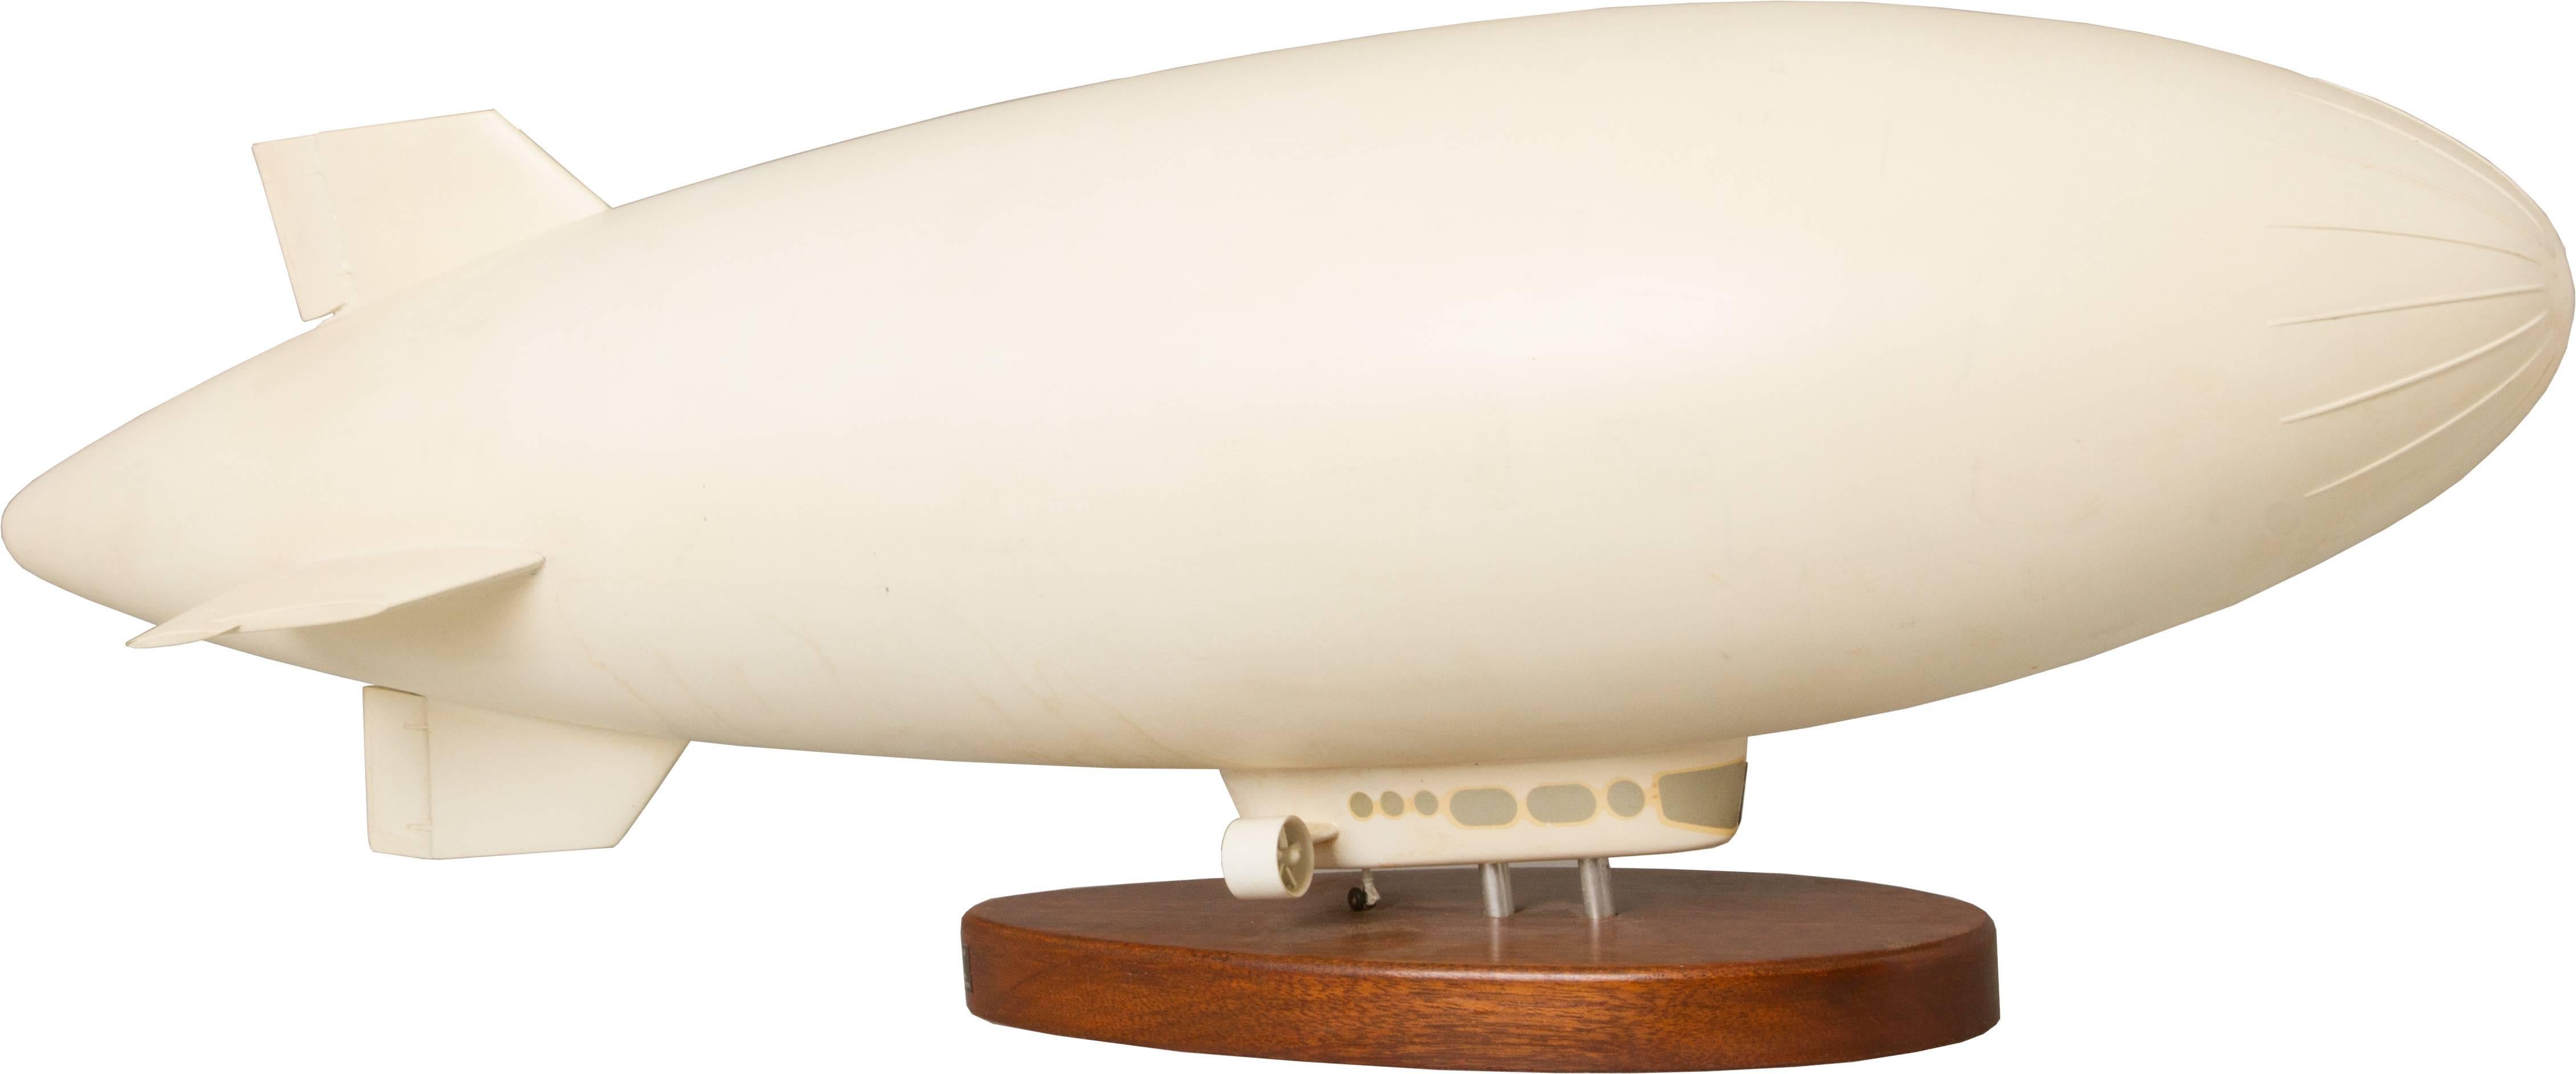 This is an interesting large model made by the Jupiter Precision Company of England. The blimp is mounted on a wooden stand.